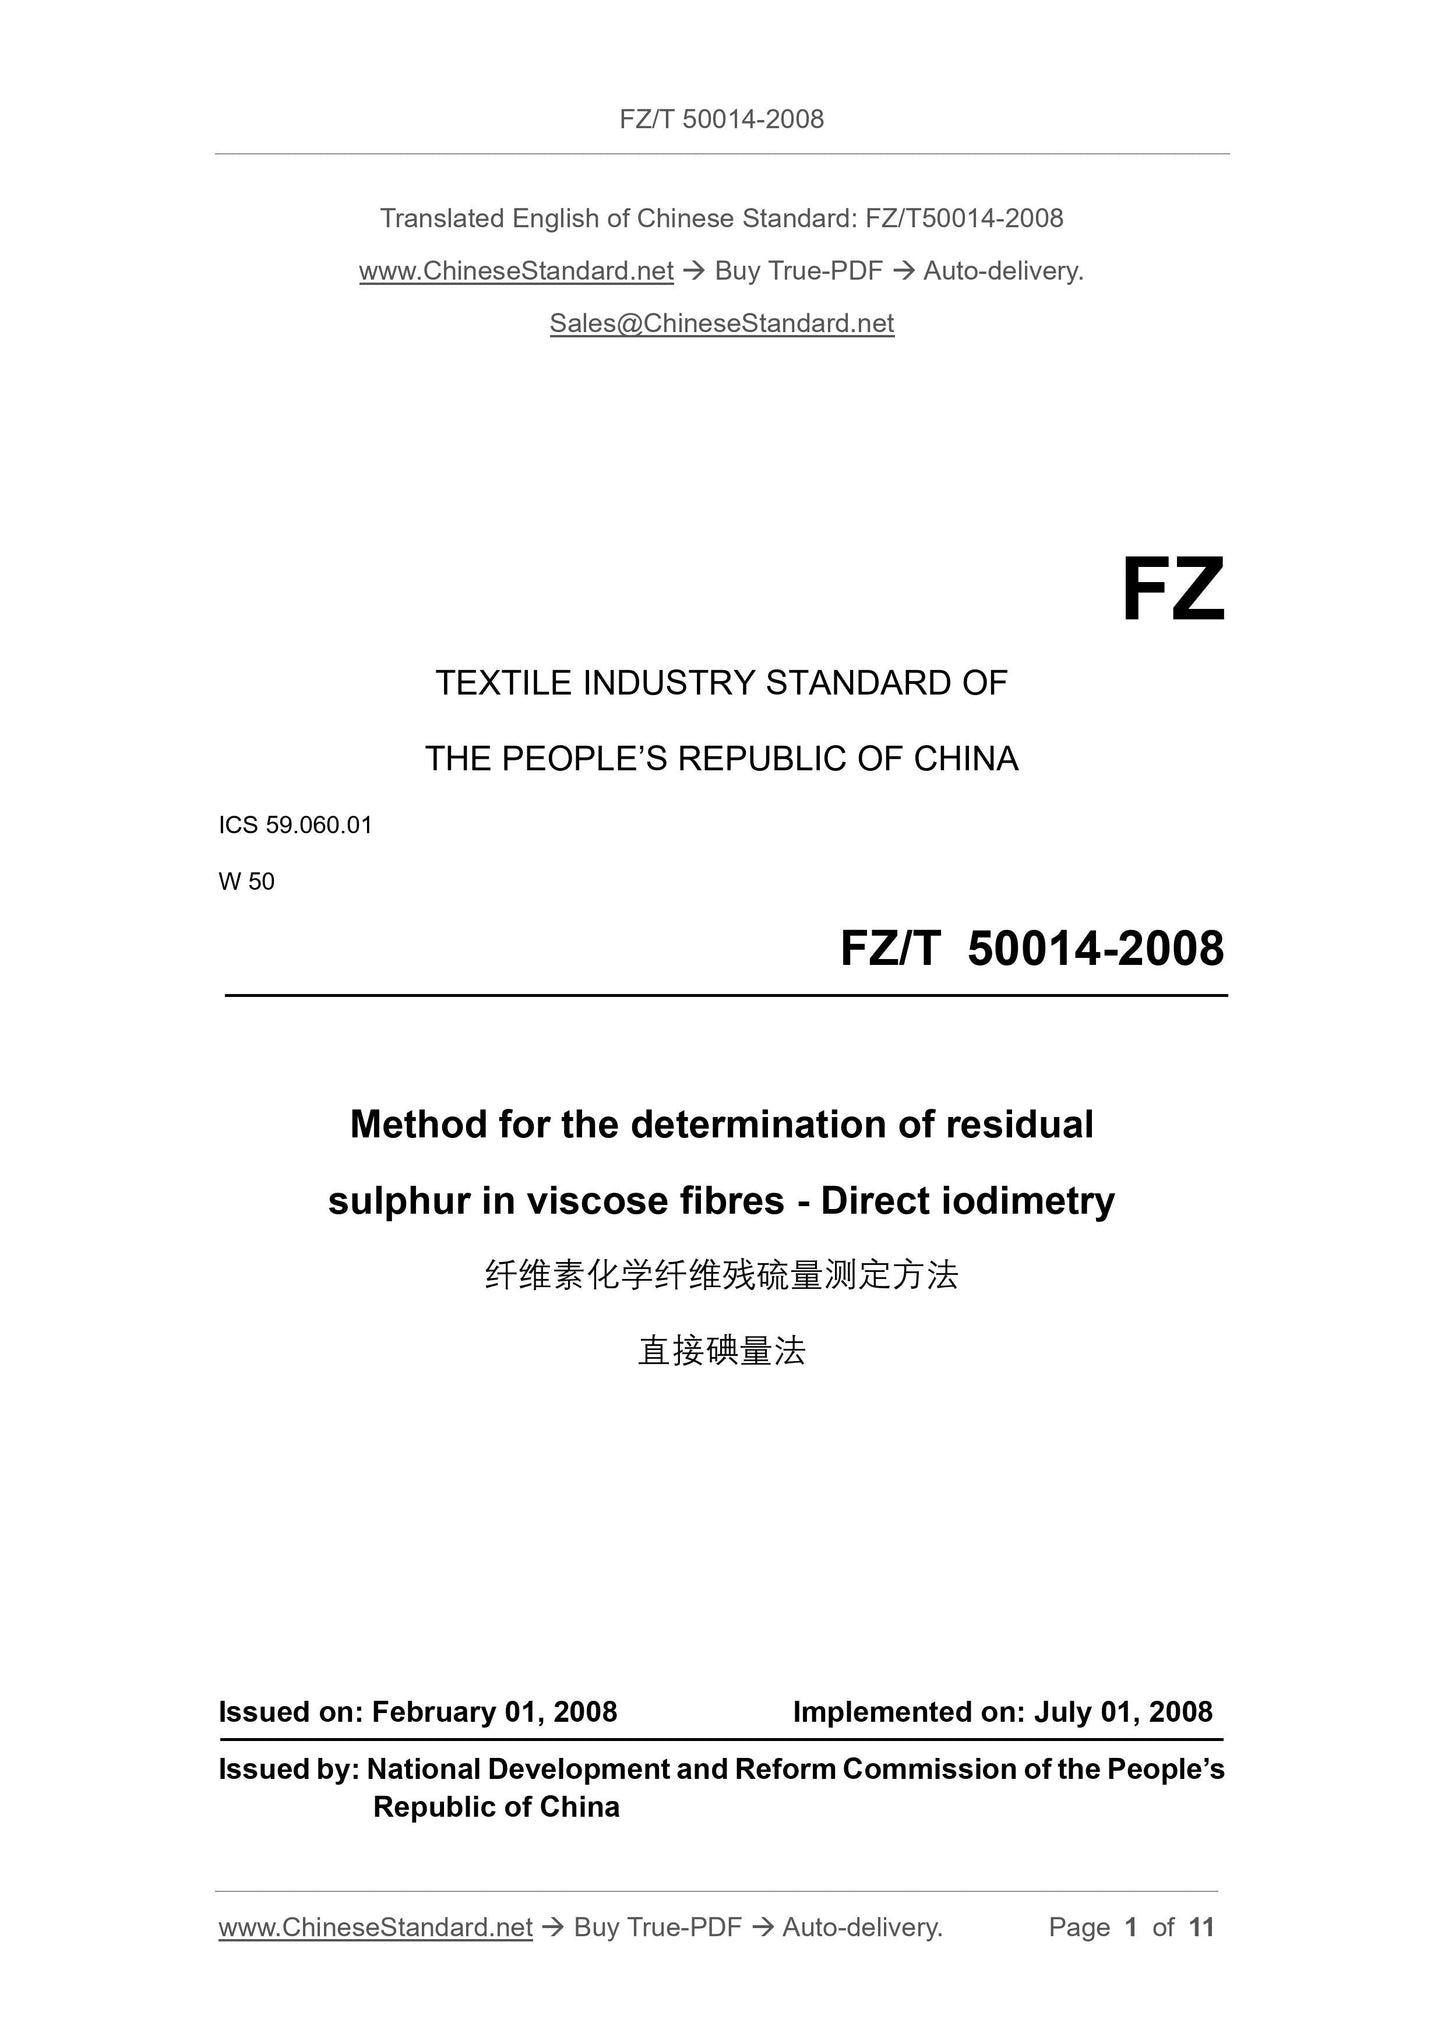 FZ/T 50014-2008 Page 1